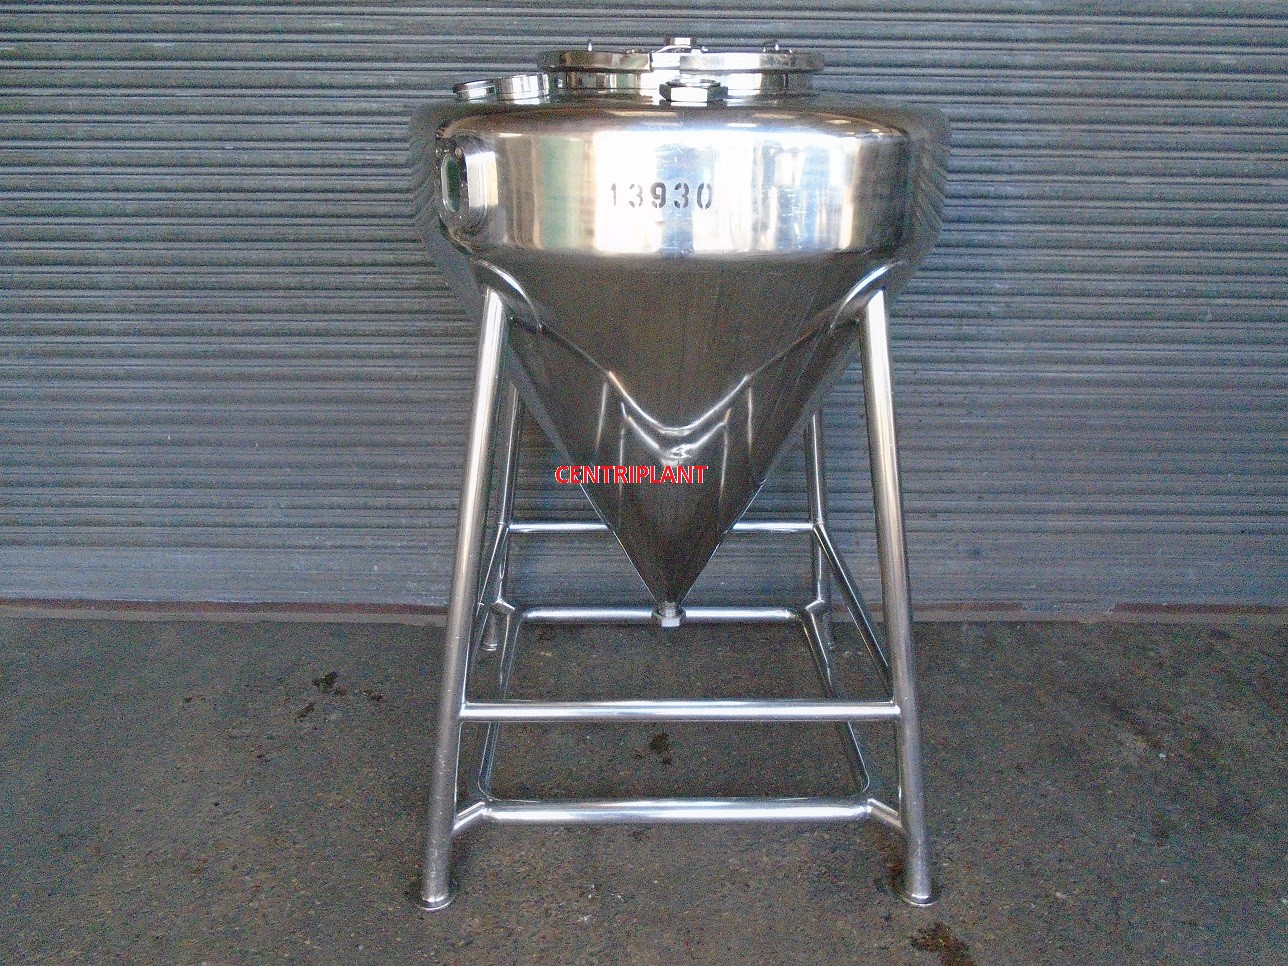 13930 - 500 LITRE 316 STAINLESS STEEL TANK